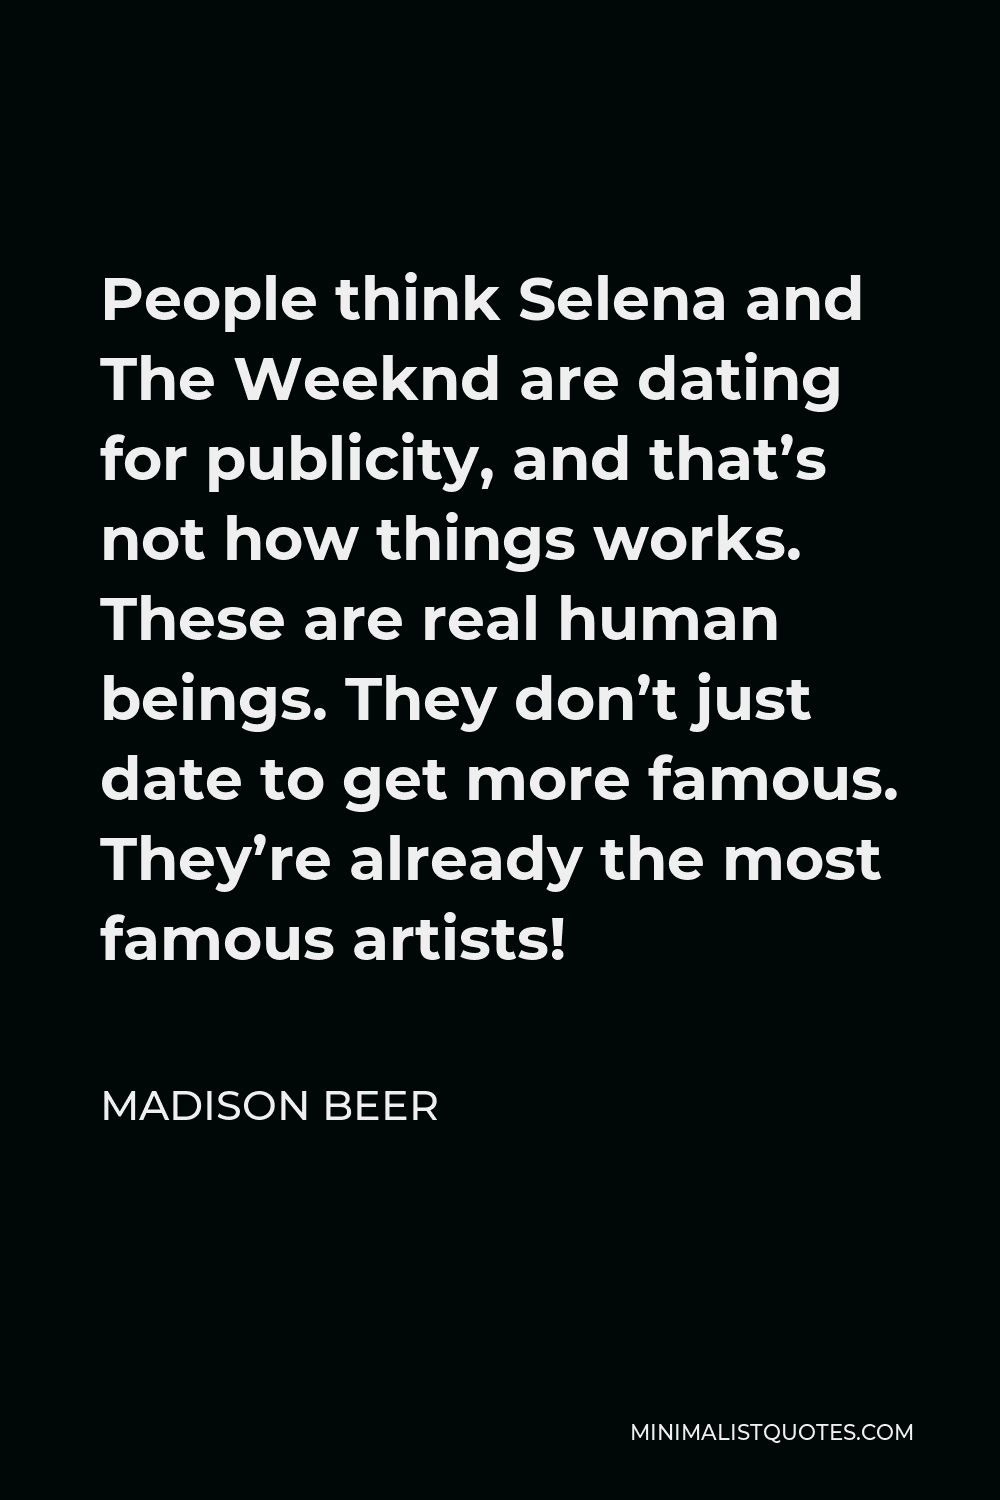 Madison Beer Quote - People think Selena and The Weeknd are dating for publicity, and that’s not how things works. These are real human beings. They don’t just date to get more famous. They’re already the most famous artists!